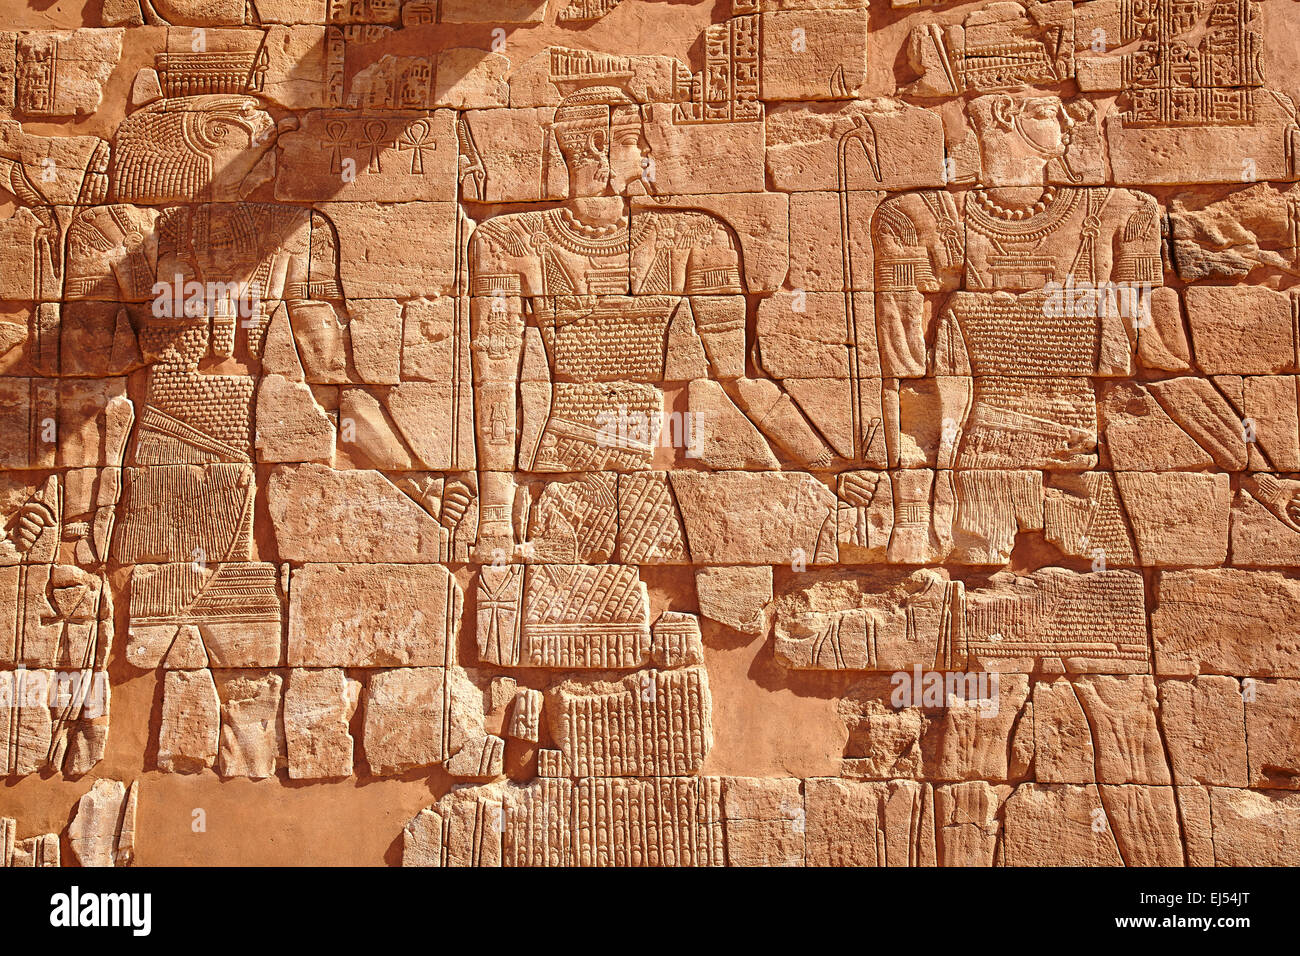 Bas-relief on a side wall of Apedemak (Lion) Temple, Musawwarat es-Sufra, North Sudan, Africa Stock Photo